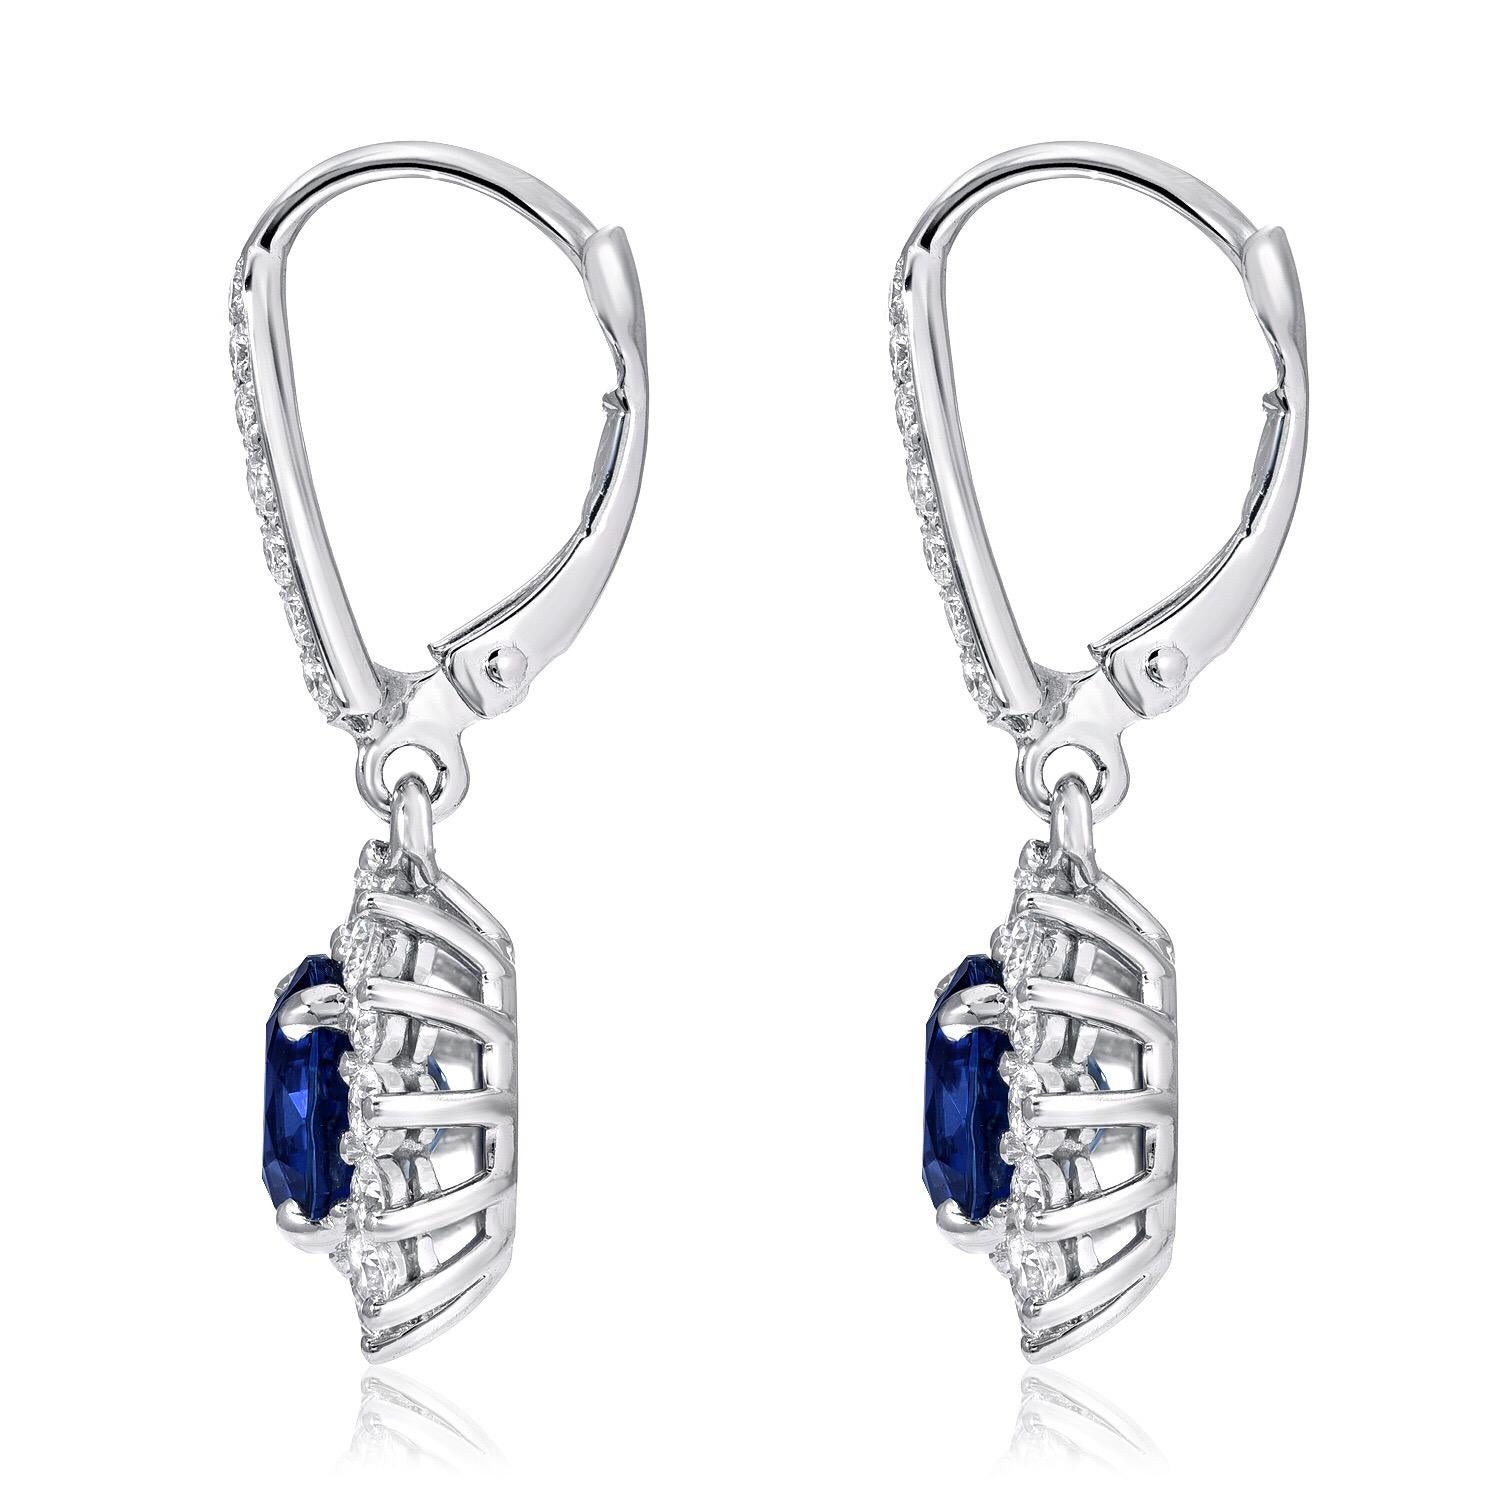 Round Cut Sapphire Earrings Rounds 3.47 Carats